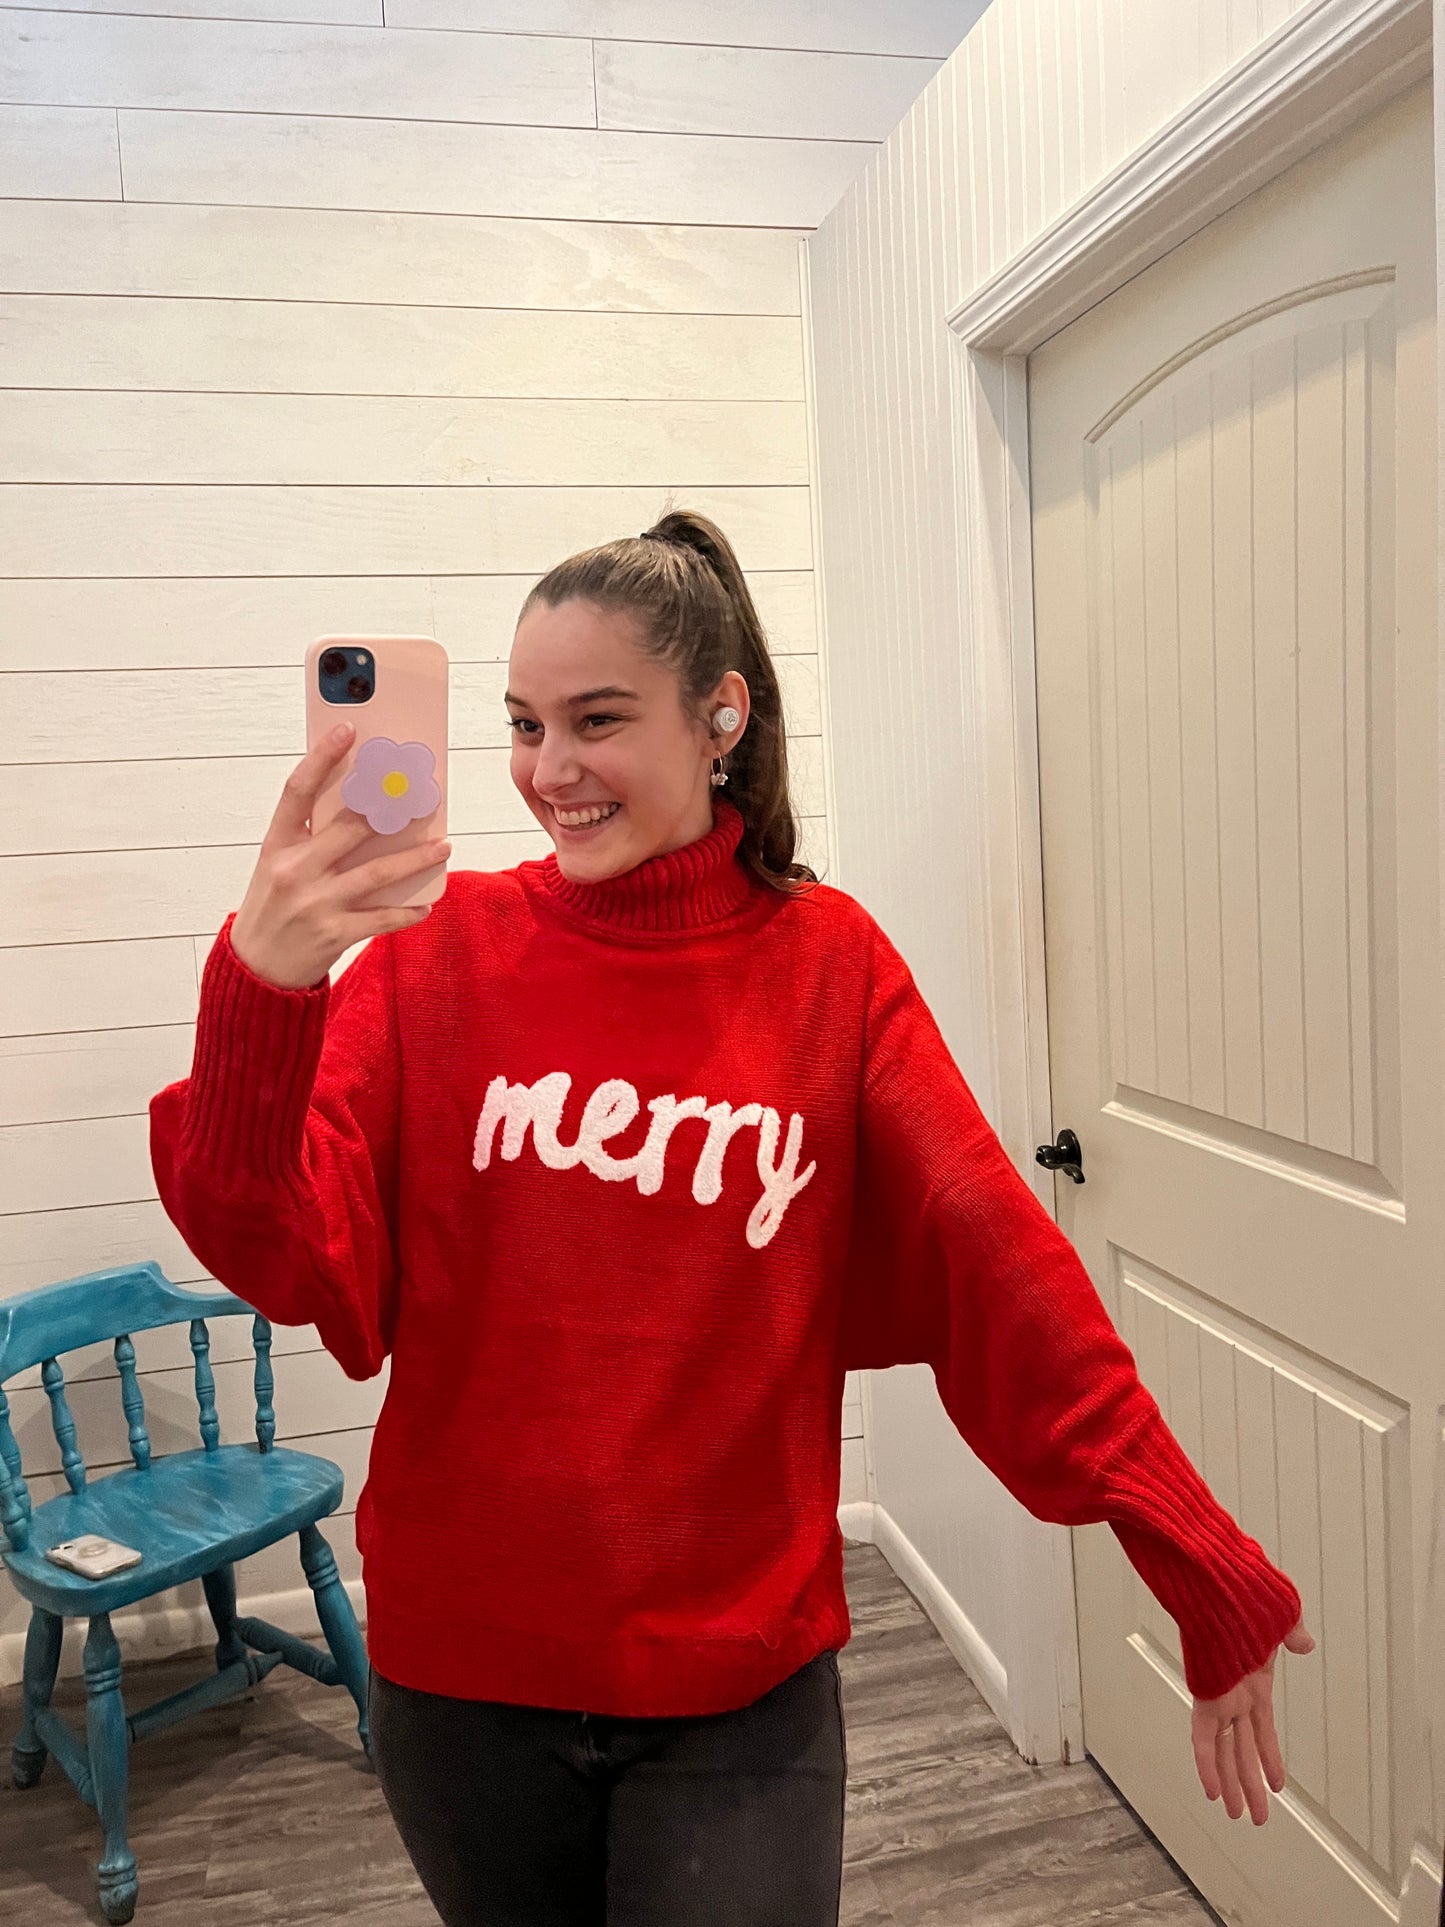 "Merry" Embroidered Turtleneck Sweater